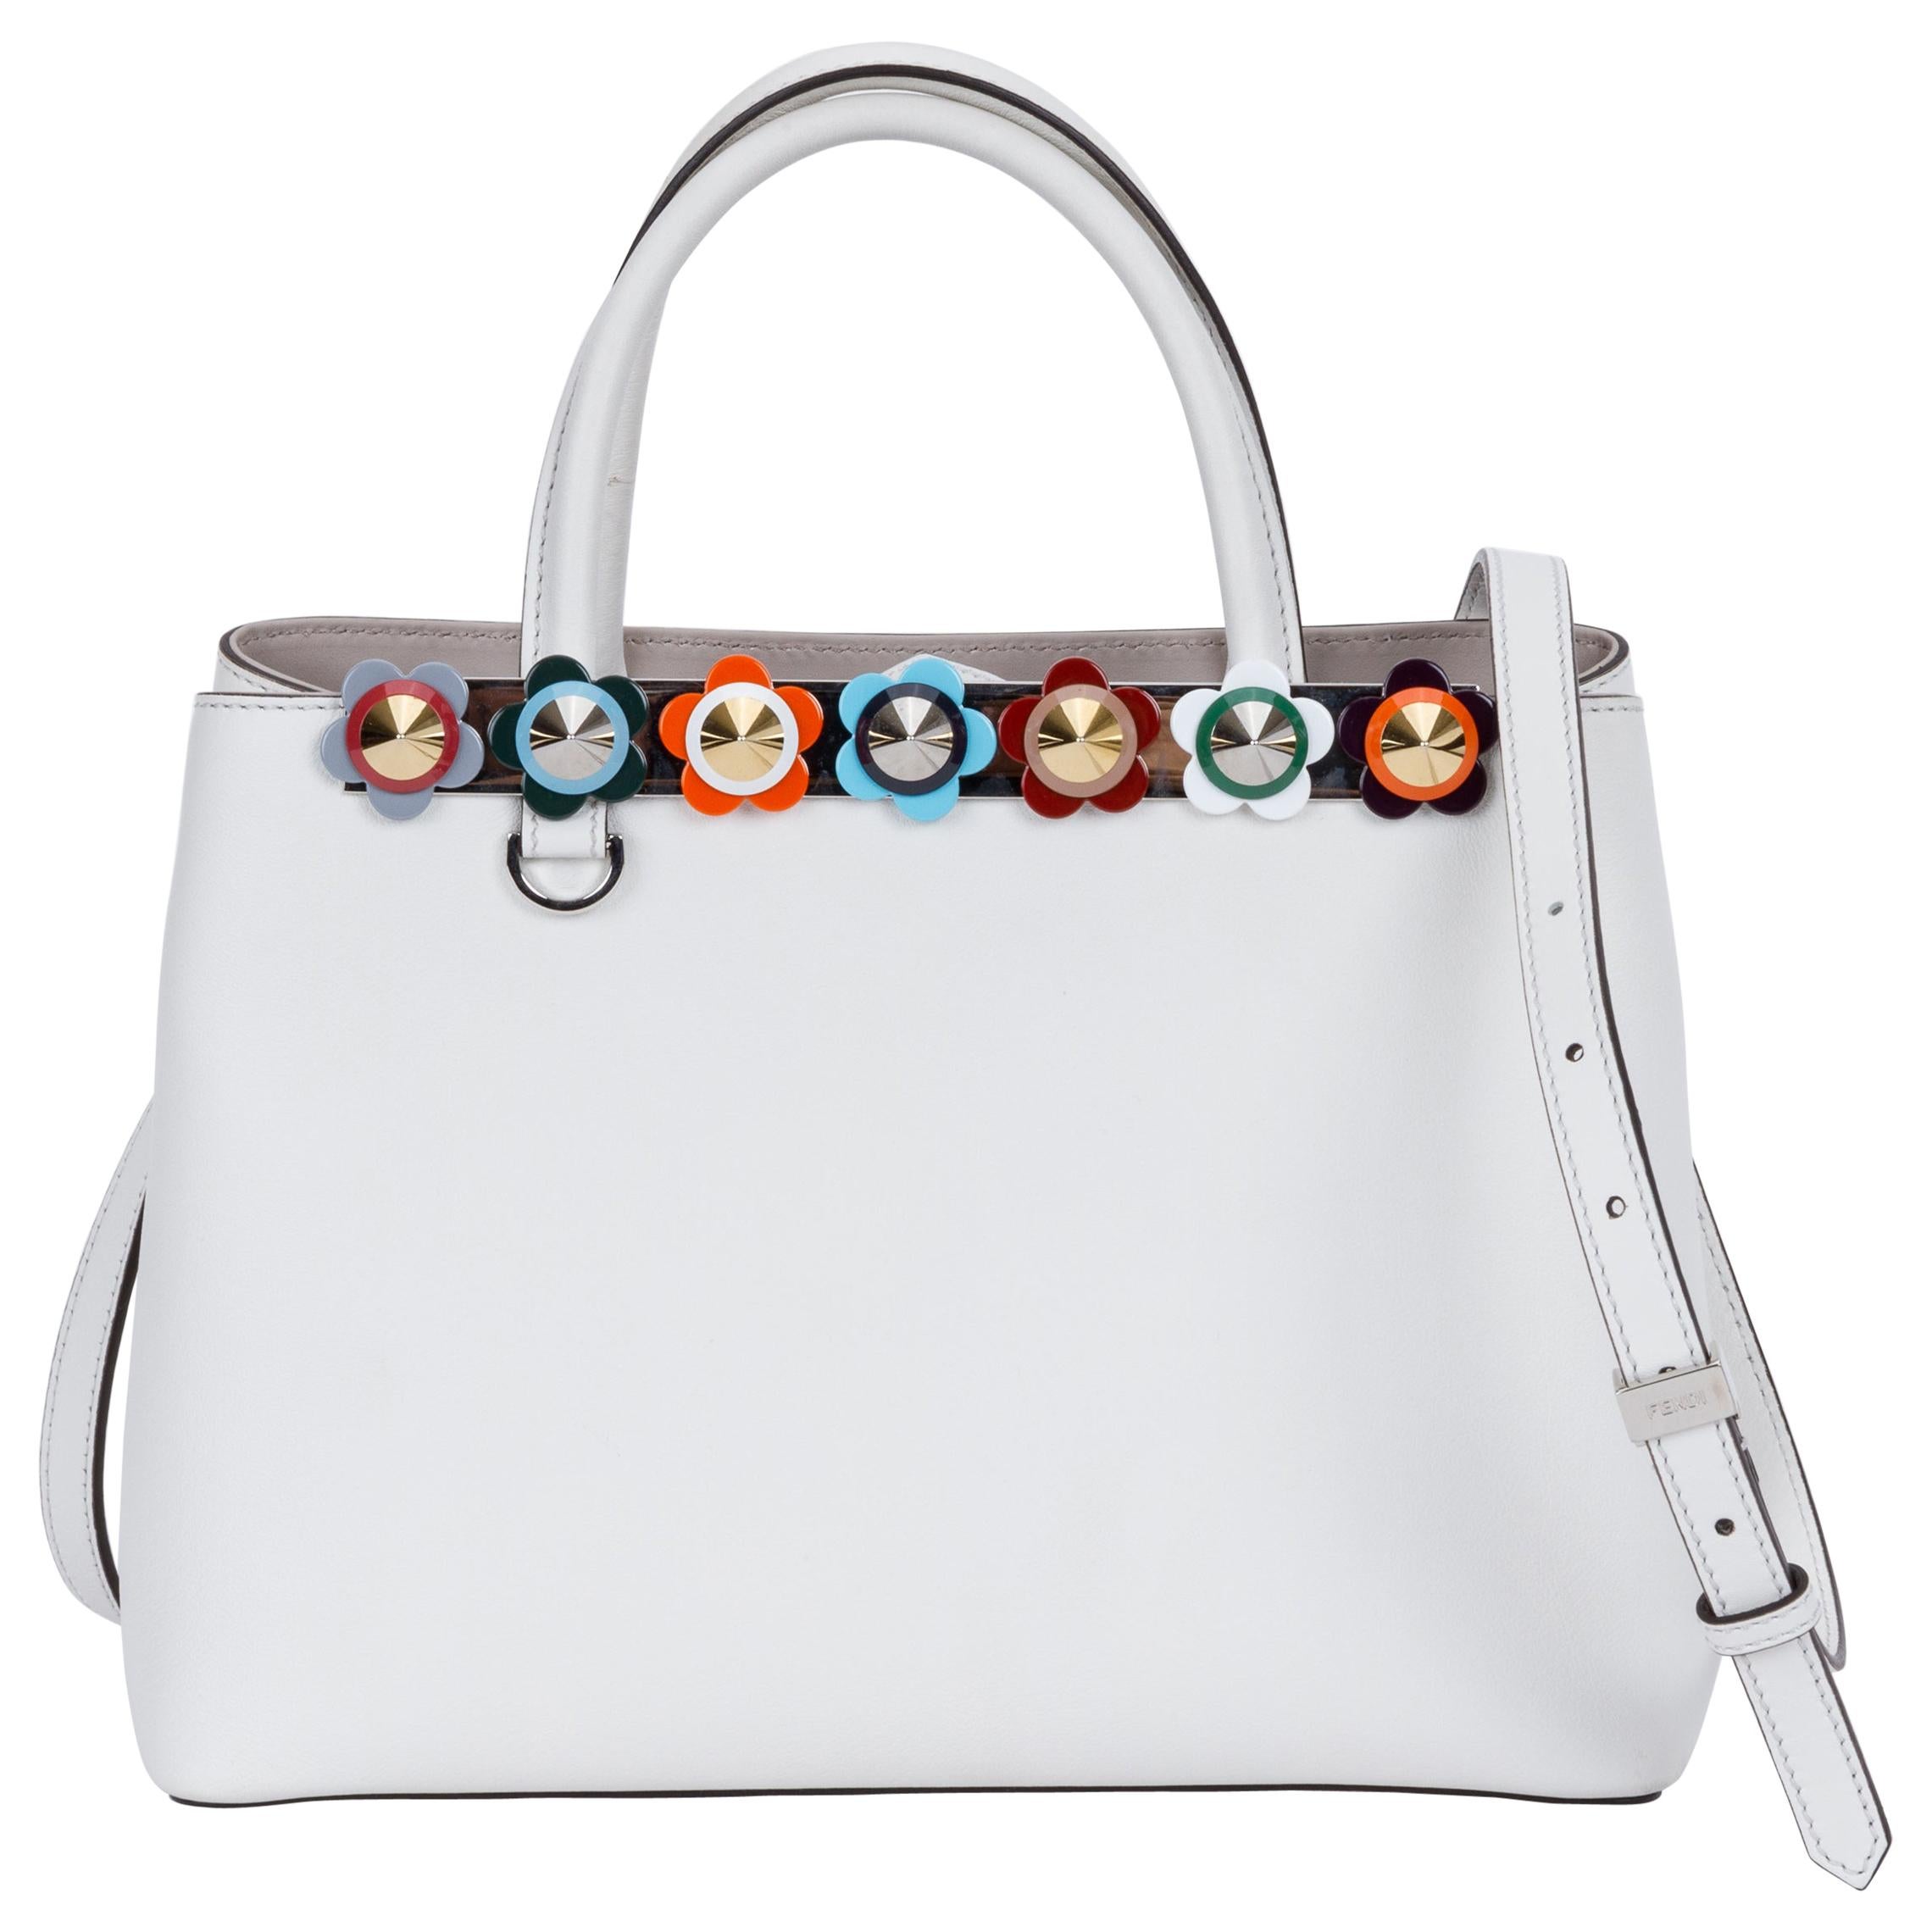 New in Box Fendi White Leather Handbag with Colored Flowers For Sale